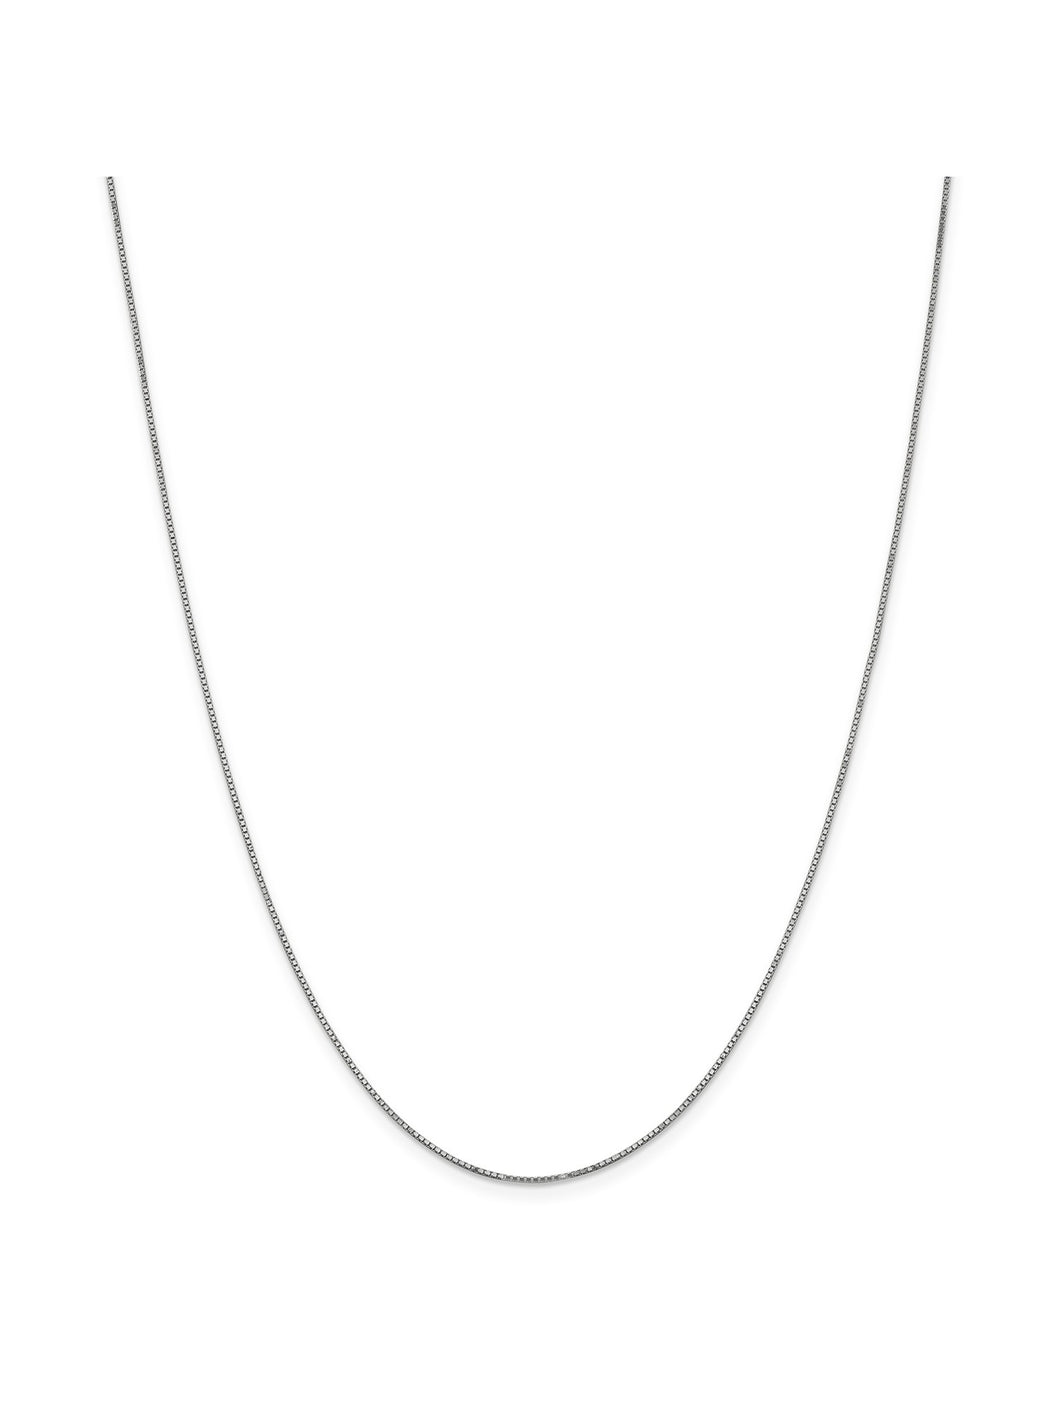 14k White Gold 0.9mm Wide Solid Box Chain Necklace